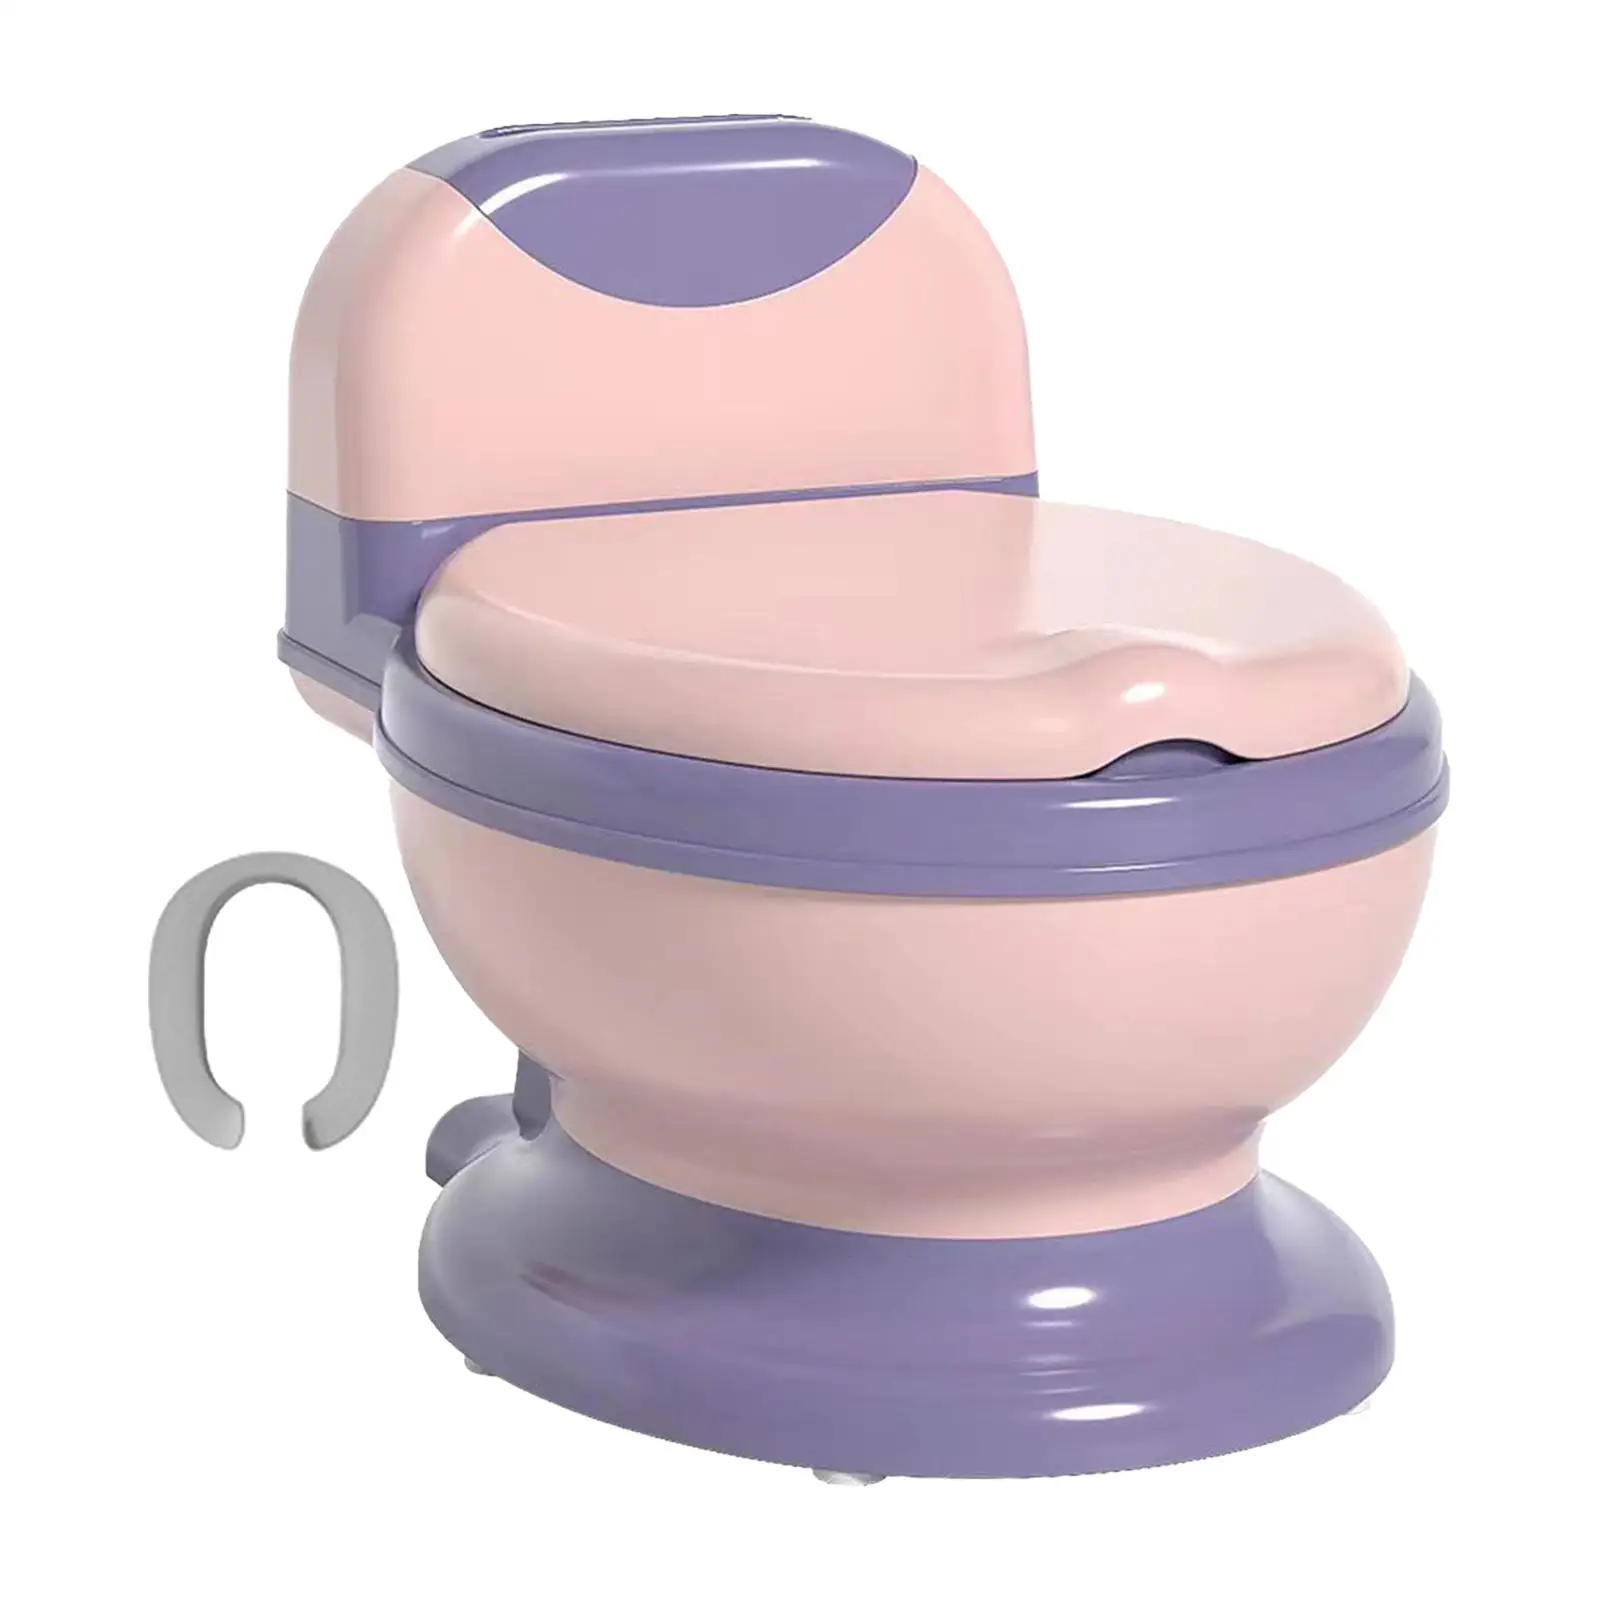 Potty Train Toilet Removable Potty Pot Potty Train Seat Portable Real Feel Potty for Kids Children Baby Girls Toddlers